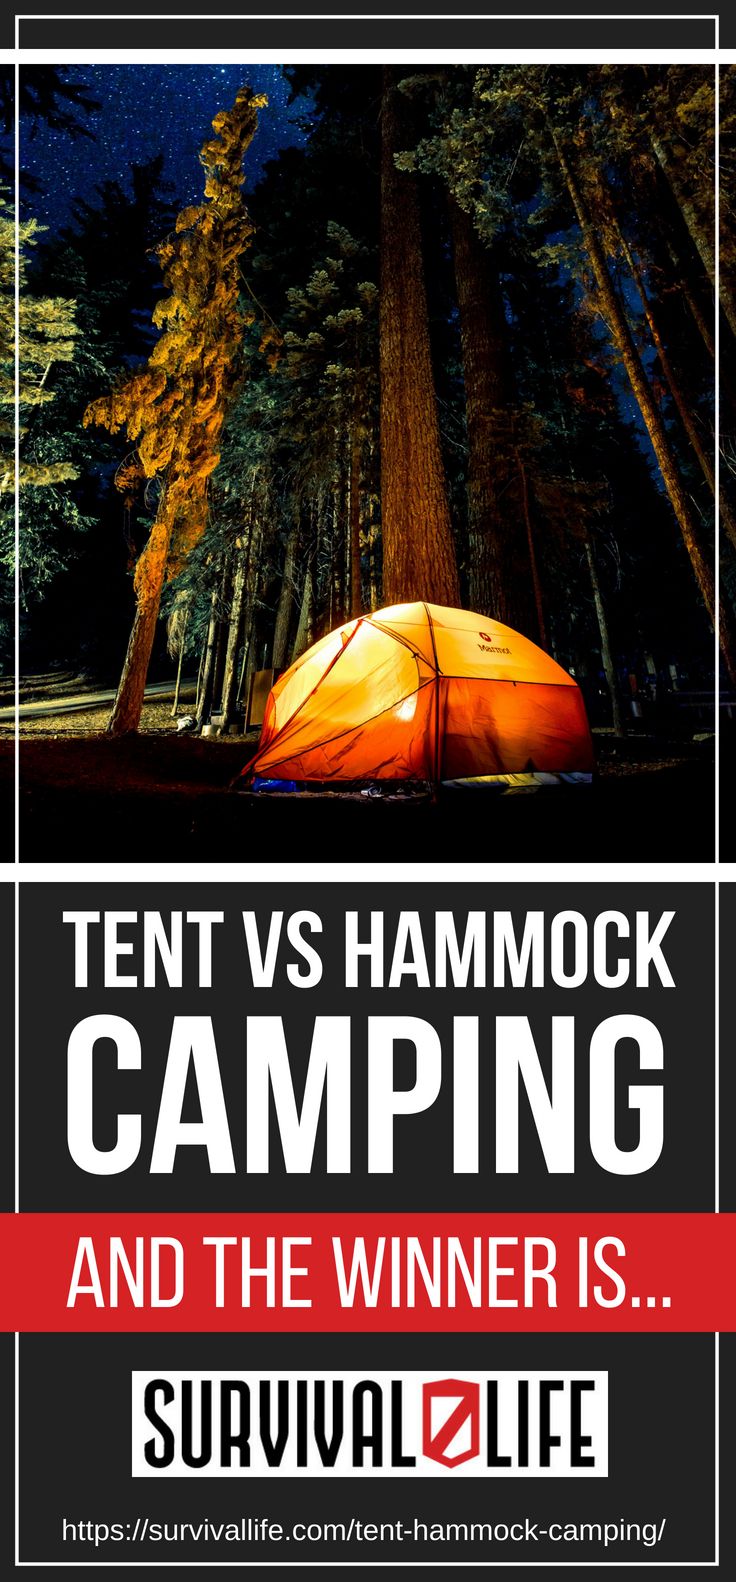 Poster |  Tent or hammock |  Hammock Camping Tips and More!  |  Survival life